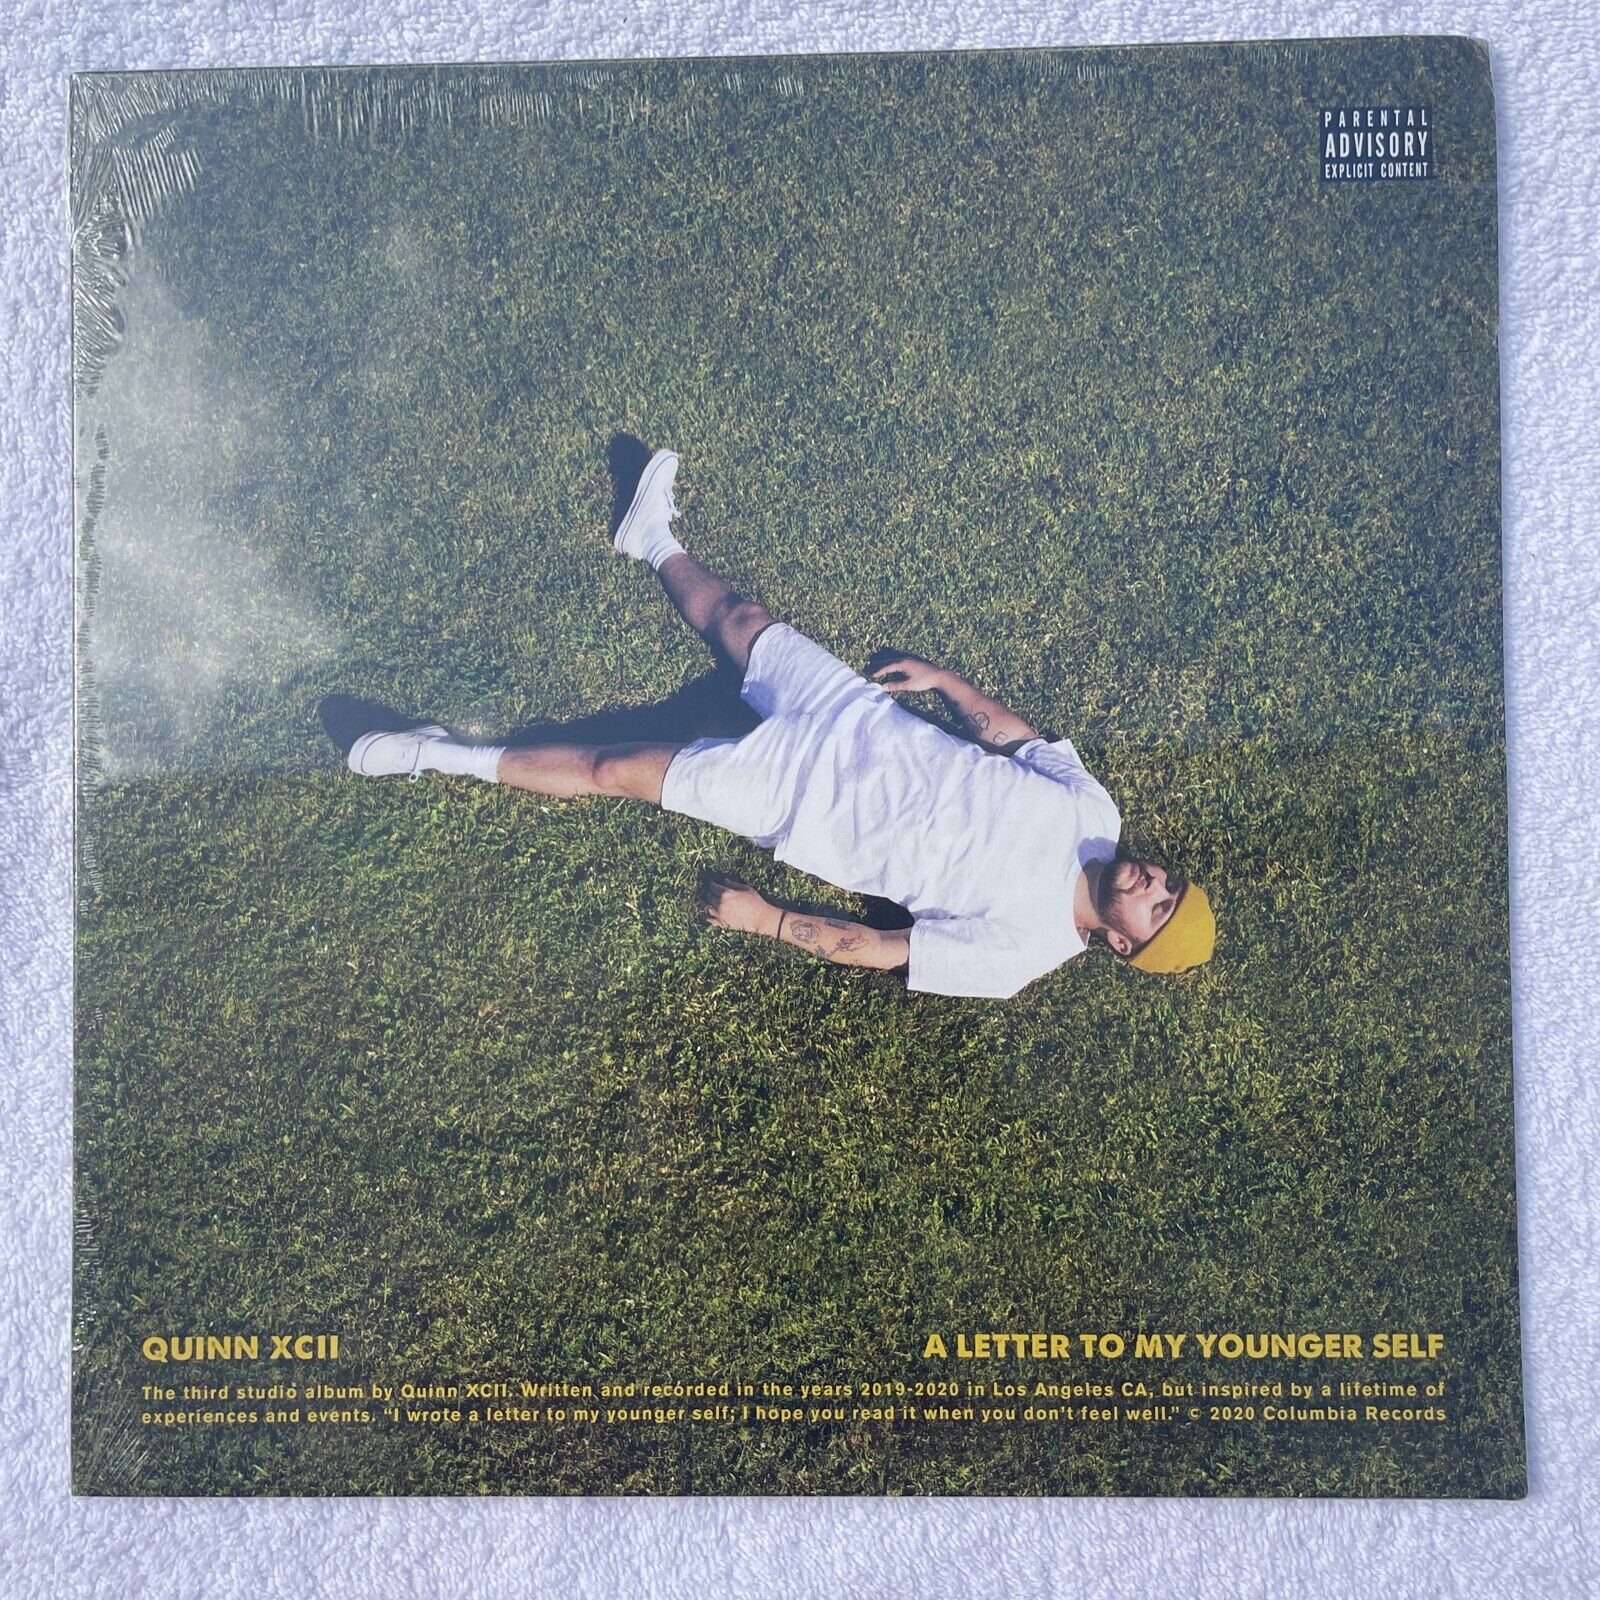 Amazing New Vinyl A Letter To My Younger Self by Quinn Xcii (Record, 2020)